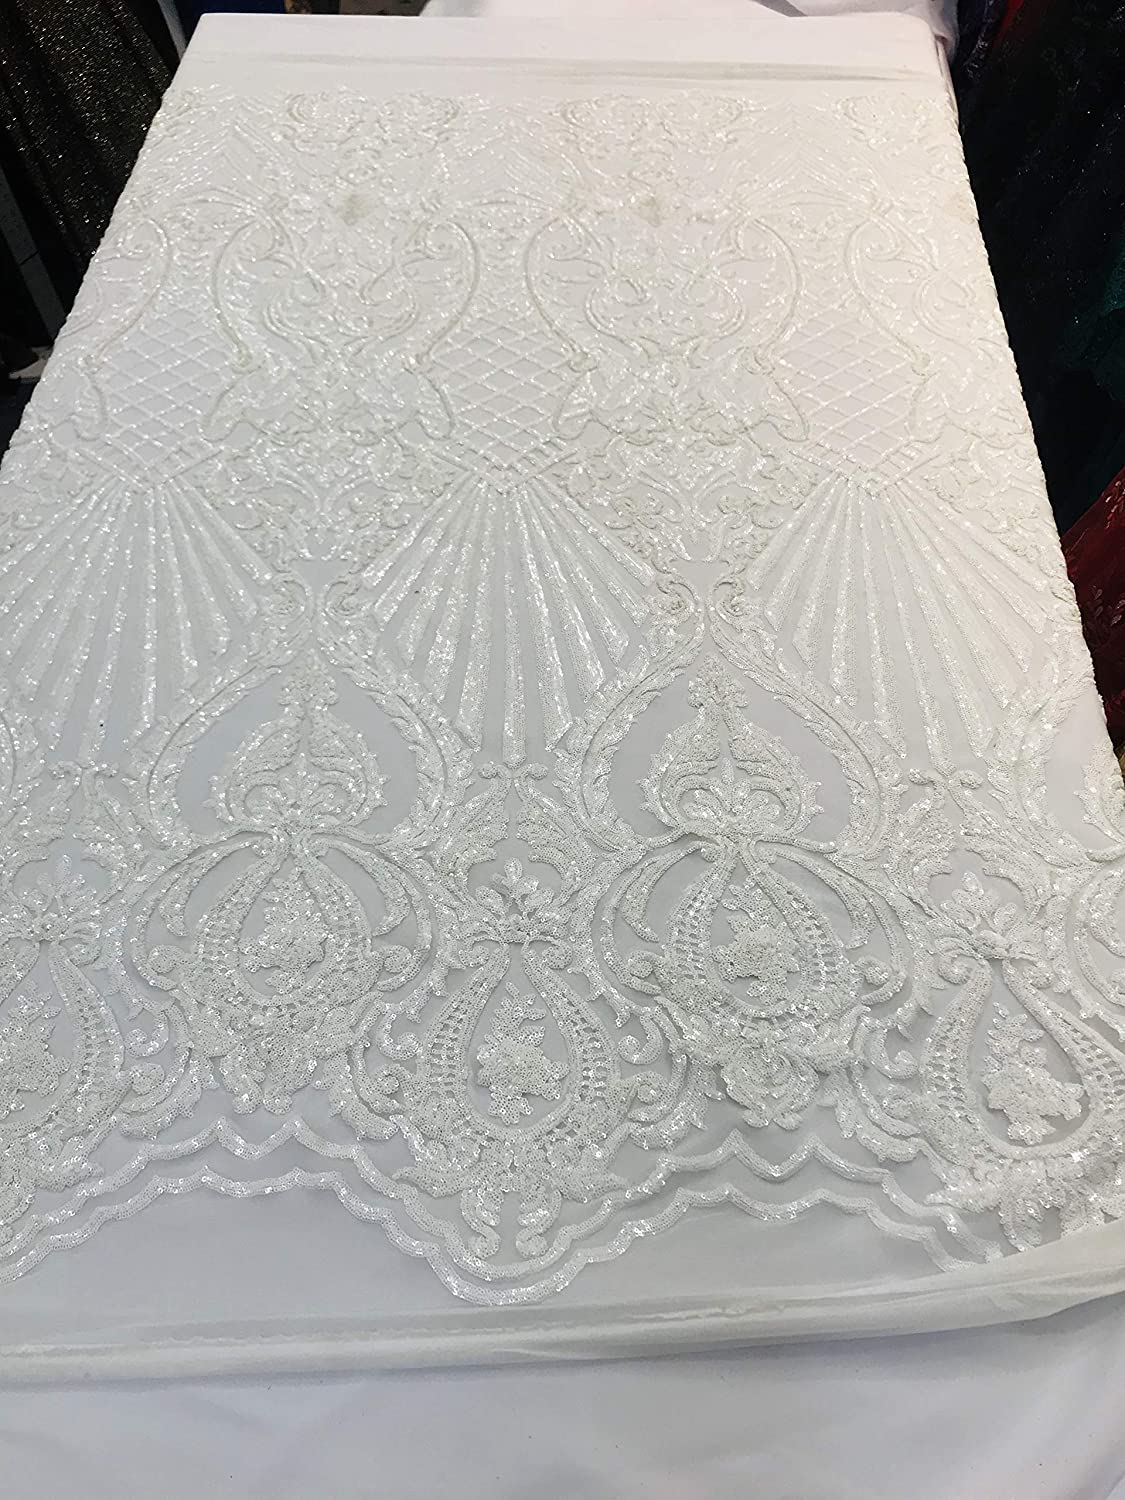 Damask Sequins Design on a 4 Way Stretch Mesh Fabric - for Night Gowns - Prom Dresses - (White on White, 1 Yard)